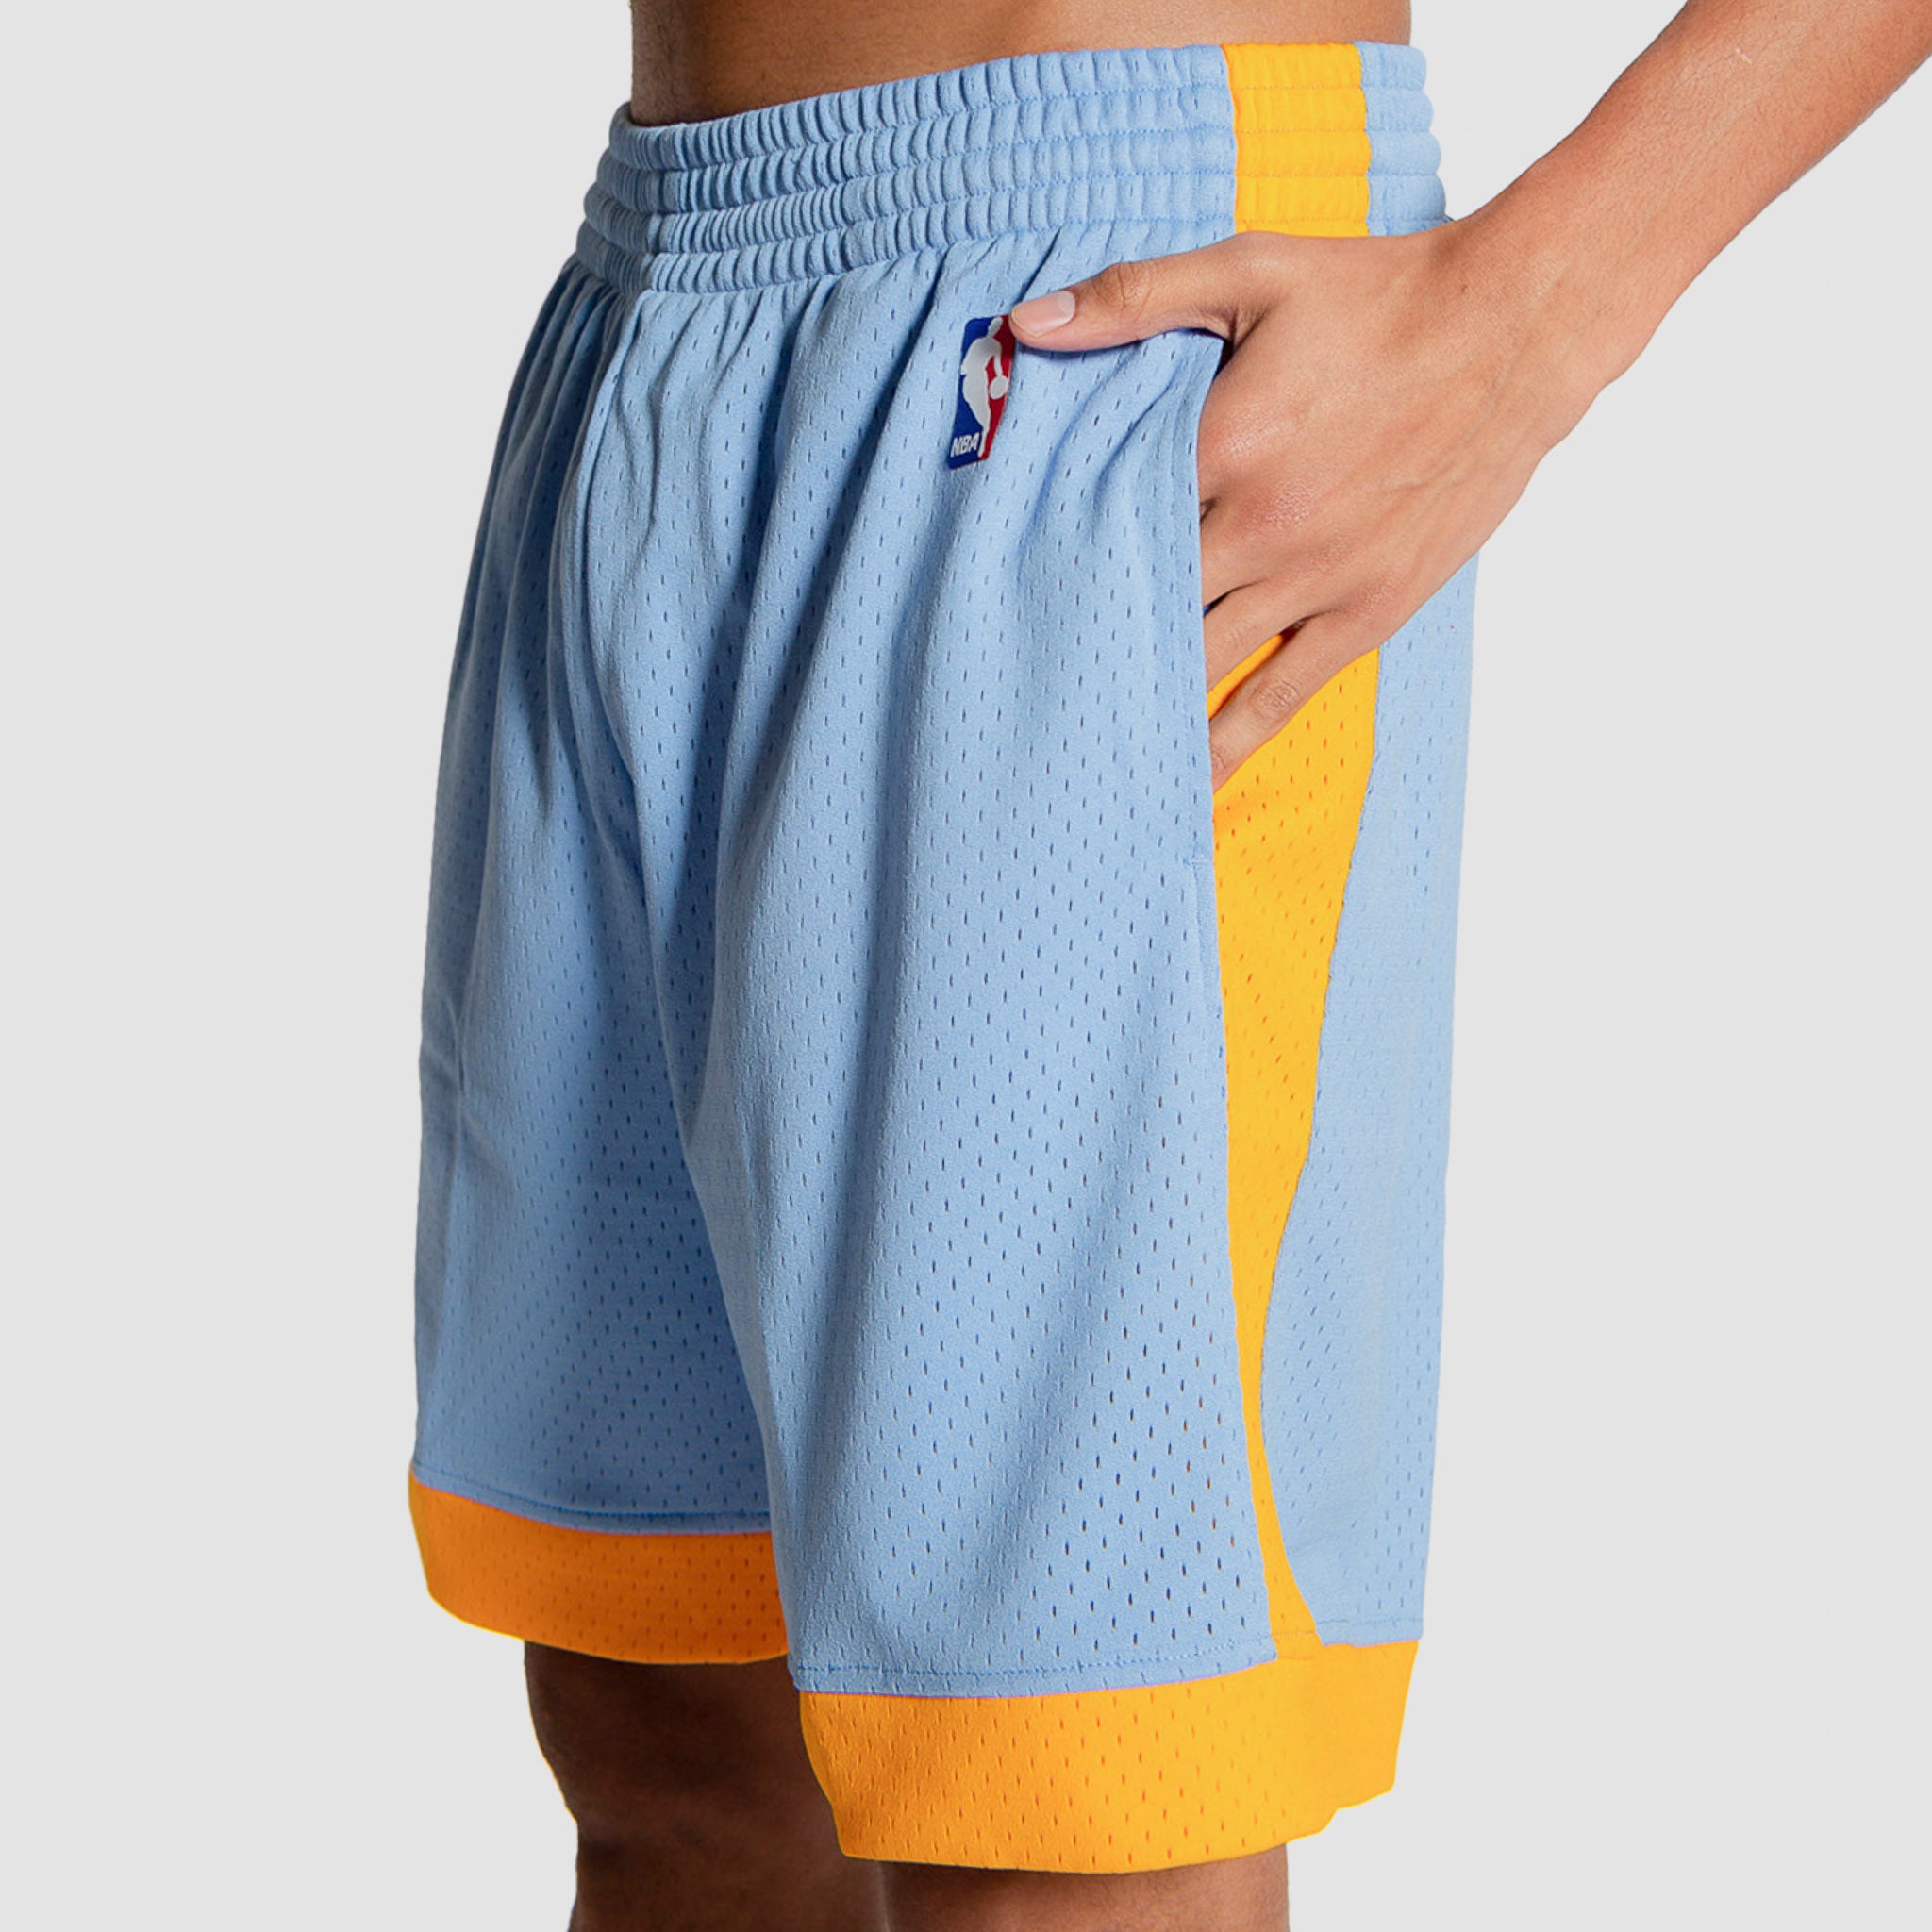 Basketball Shorts - Deck out in Authentic NBA Shorts with pockets –  Basketball Jersey World